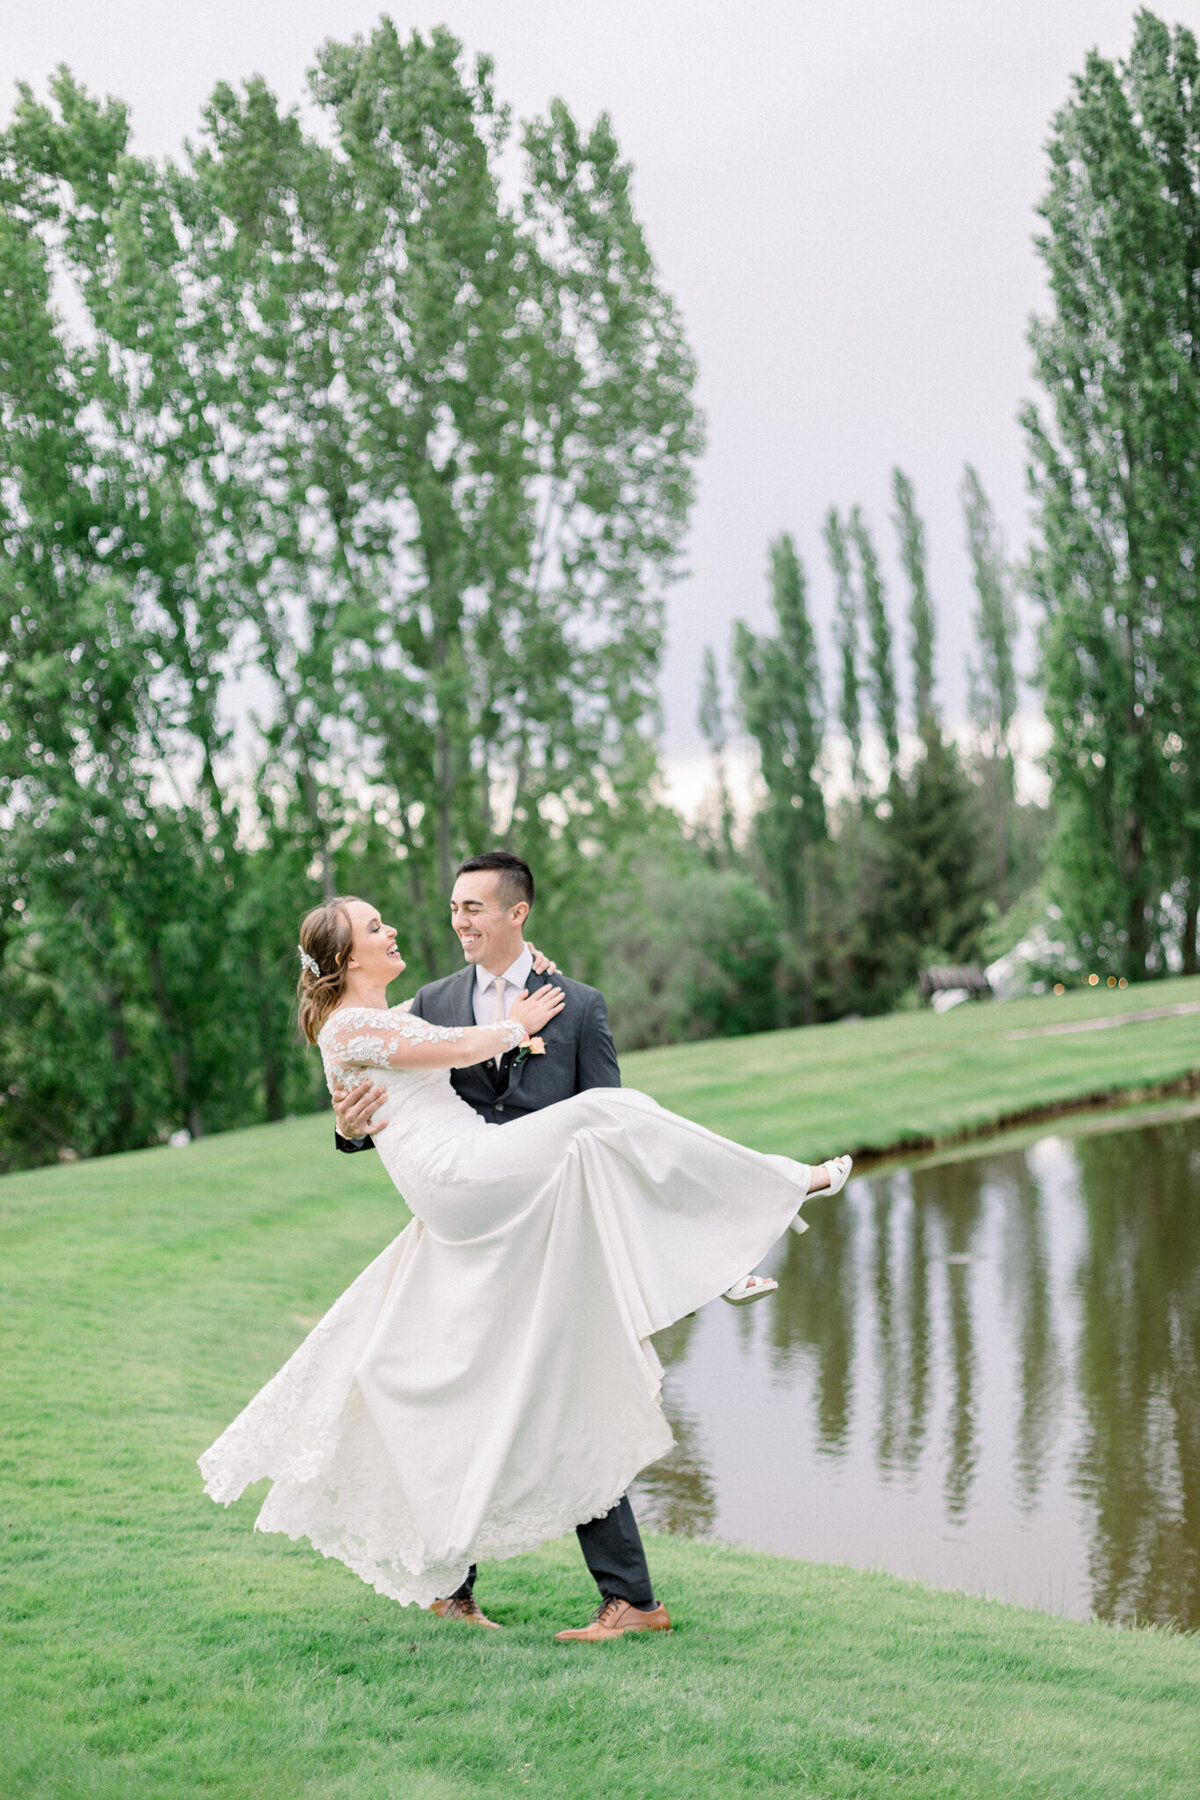 Bride and groom spinning and laughing by a  pond on their wedding day taken by washington wedding photographer